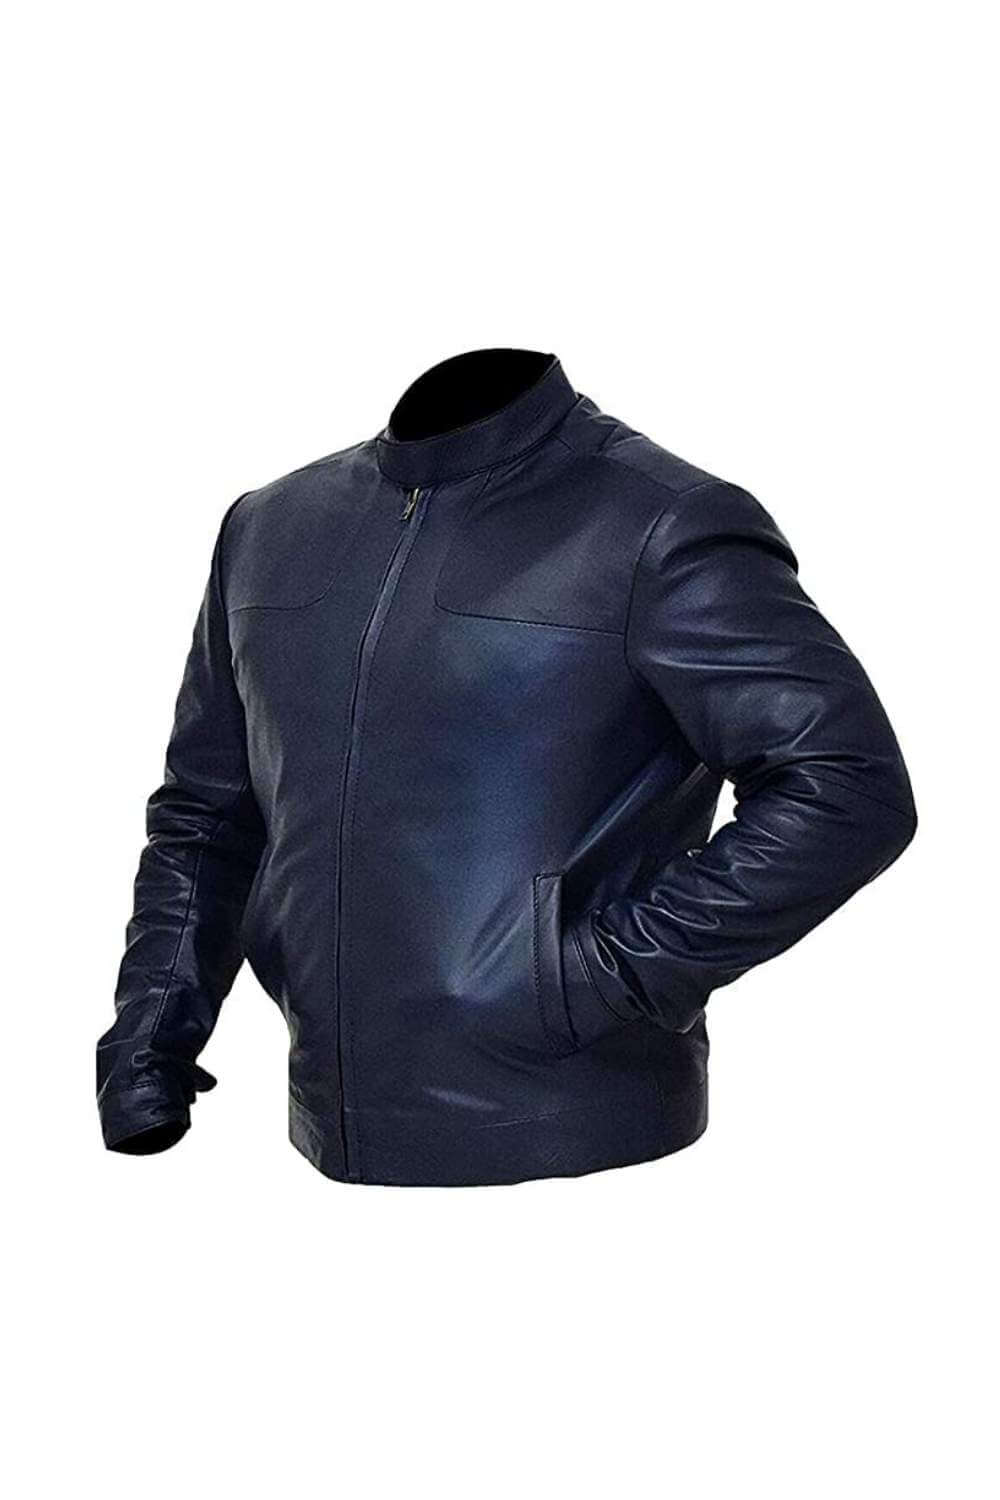 Tom Cruise Mission Impossible Fallout Black Leather Jacket | Throblife